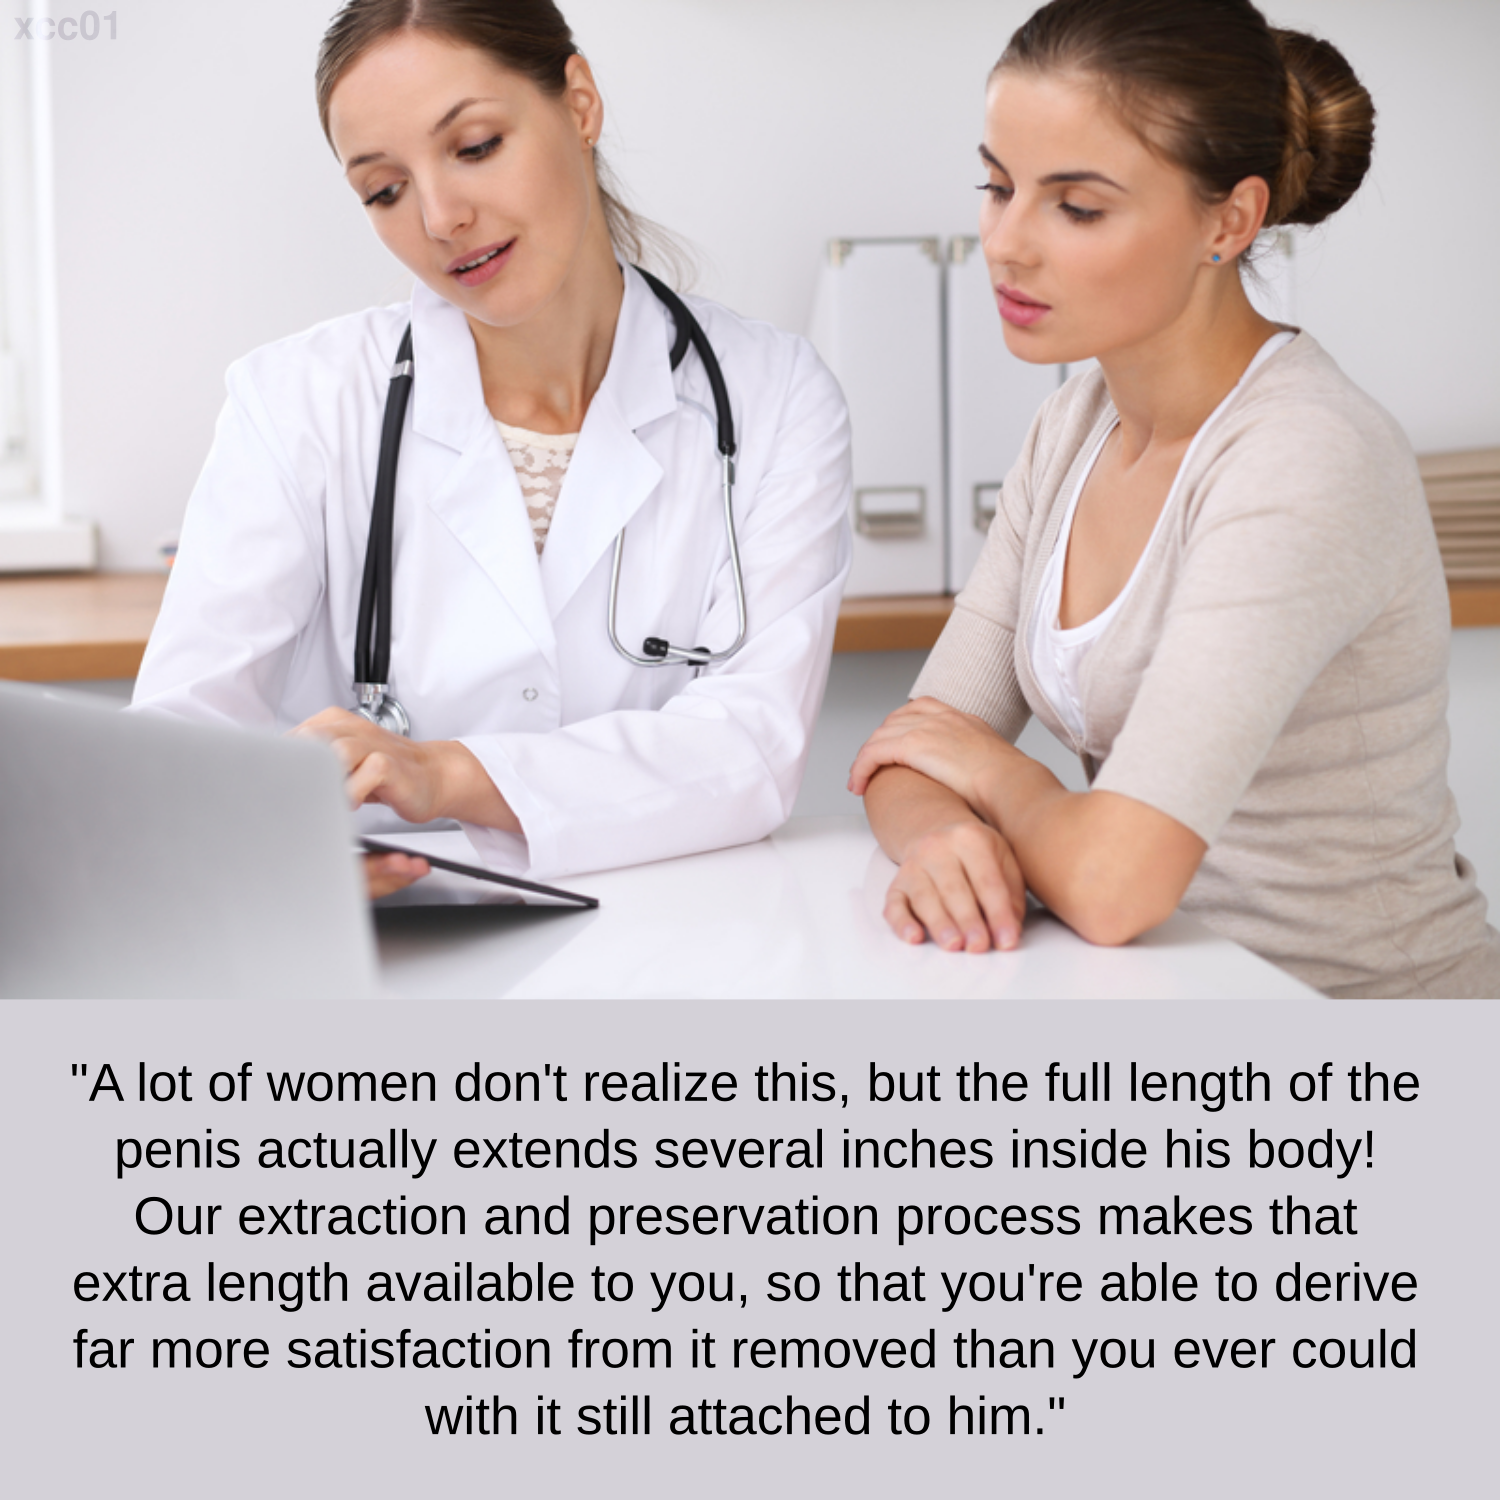 A lot of women don't realize this, but the full length of the penis actually extends several inches inside his body! Our extraction and preservation process makes that extra length available to you, so that you're able to derive far more satisfaction from it removed than you every could with it still attached to him.
